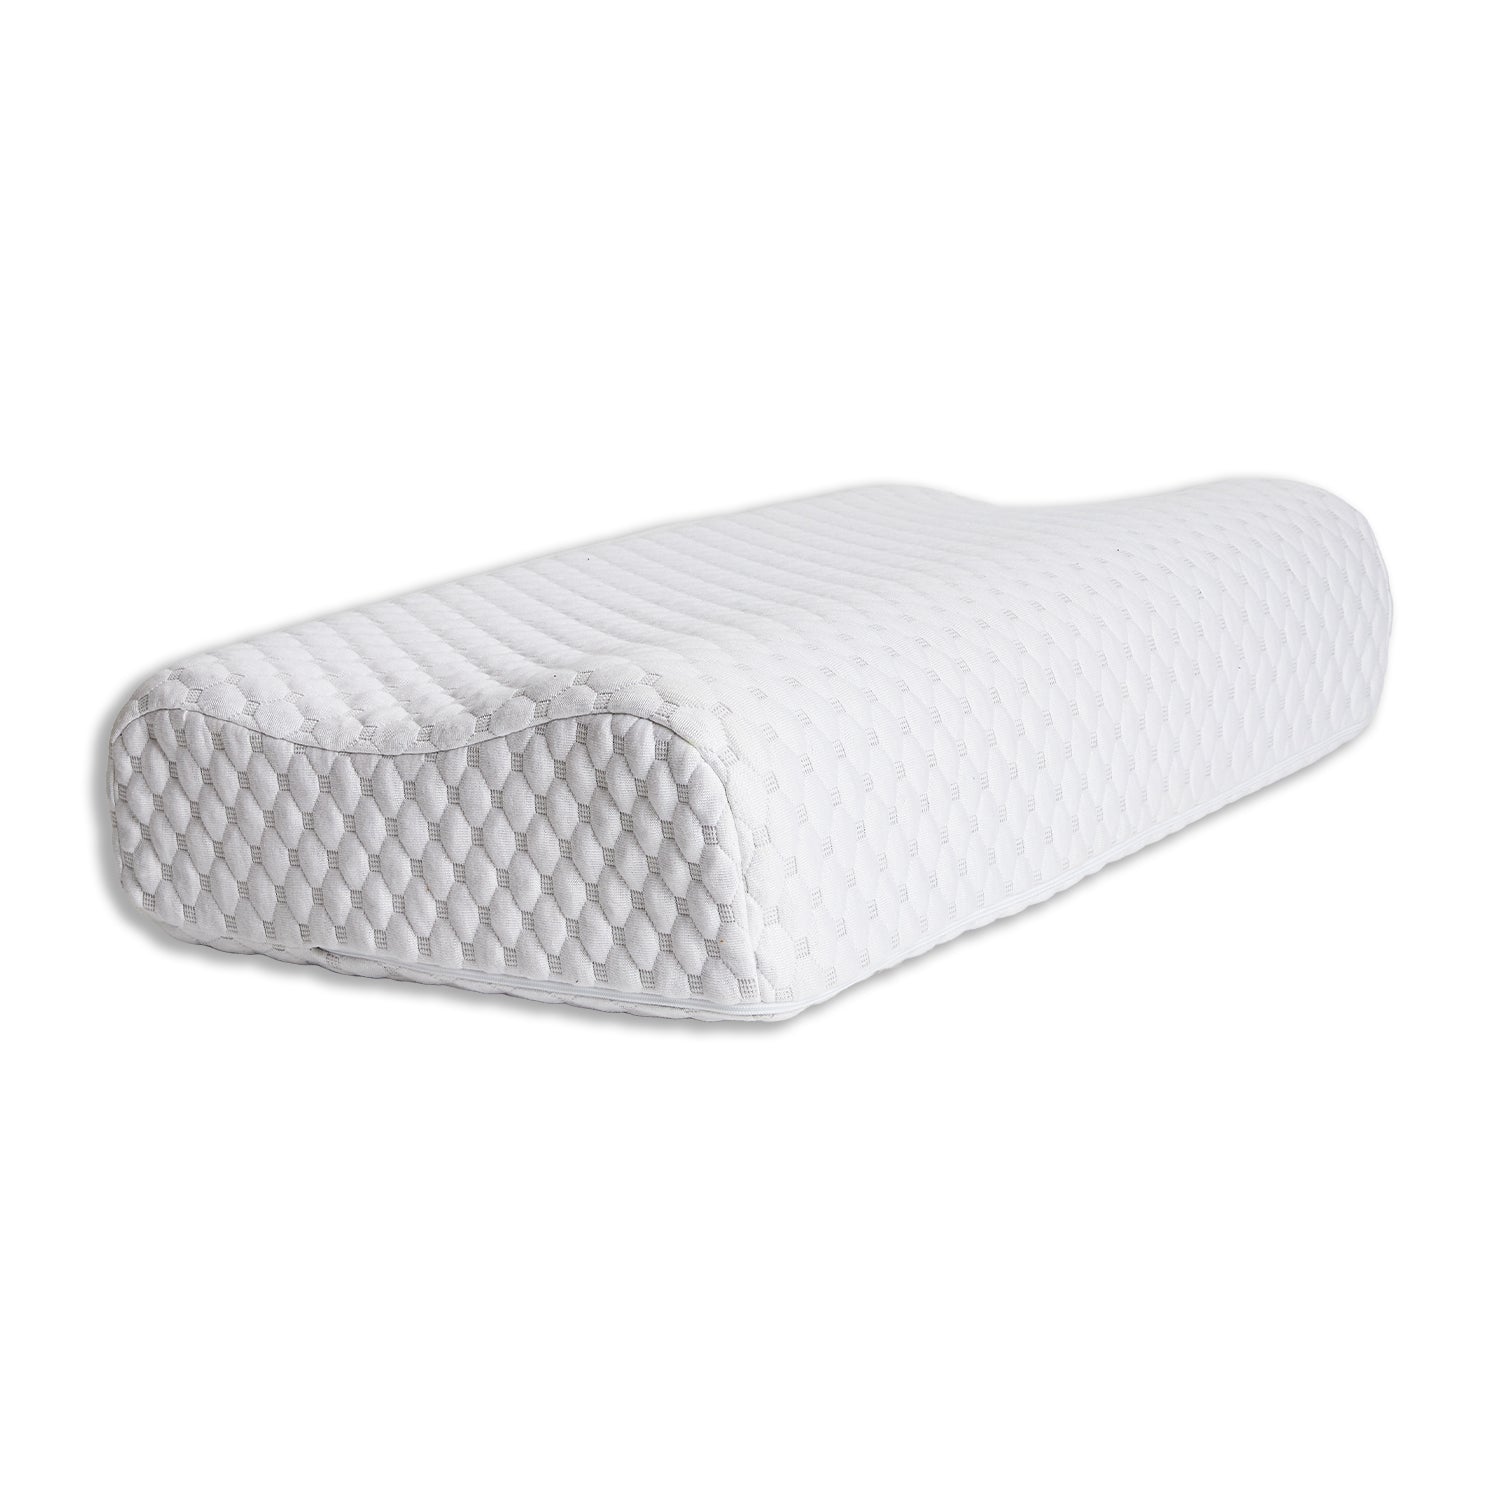 Somna Medica Gel Infused Moderate Contour Adjustable Pillow